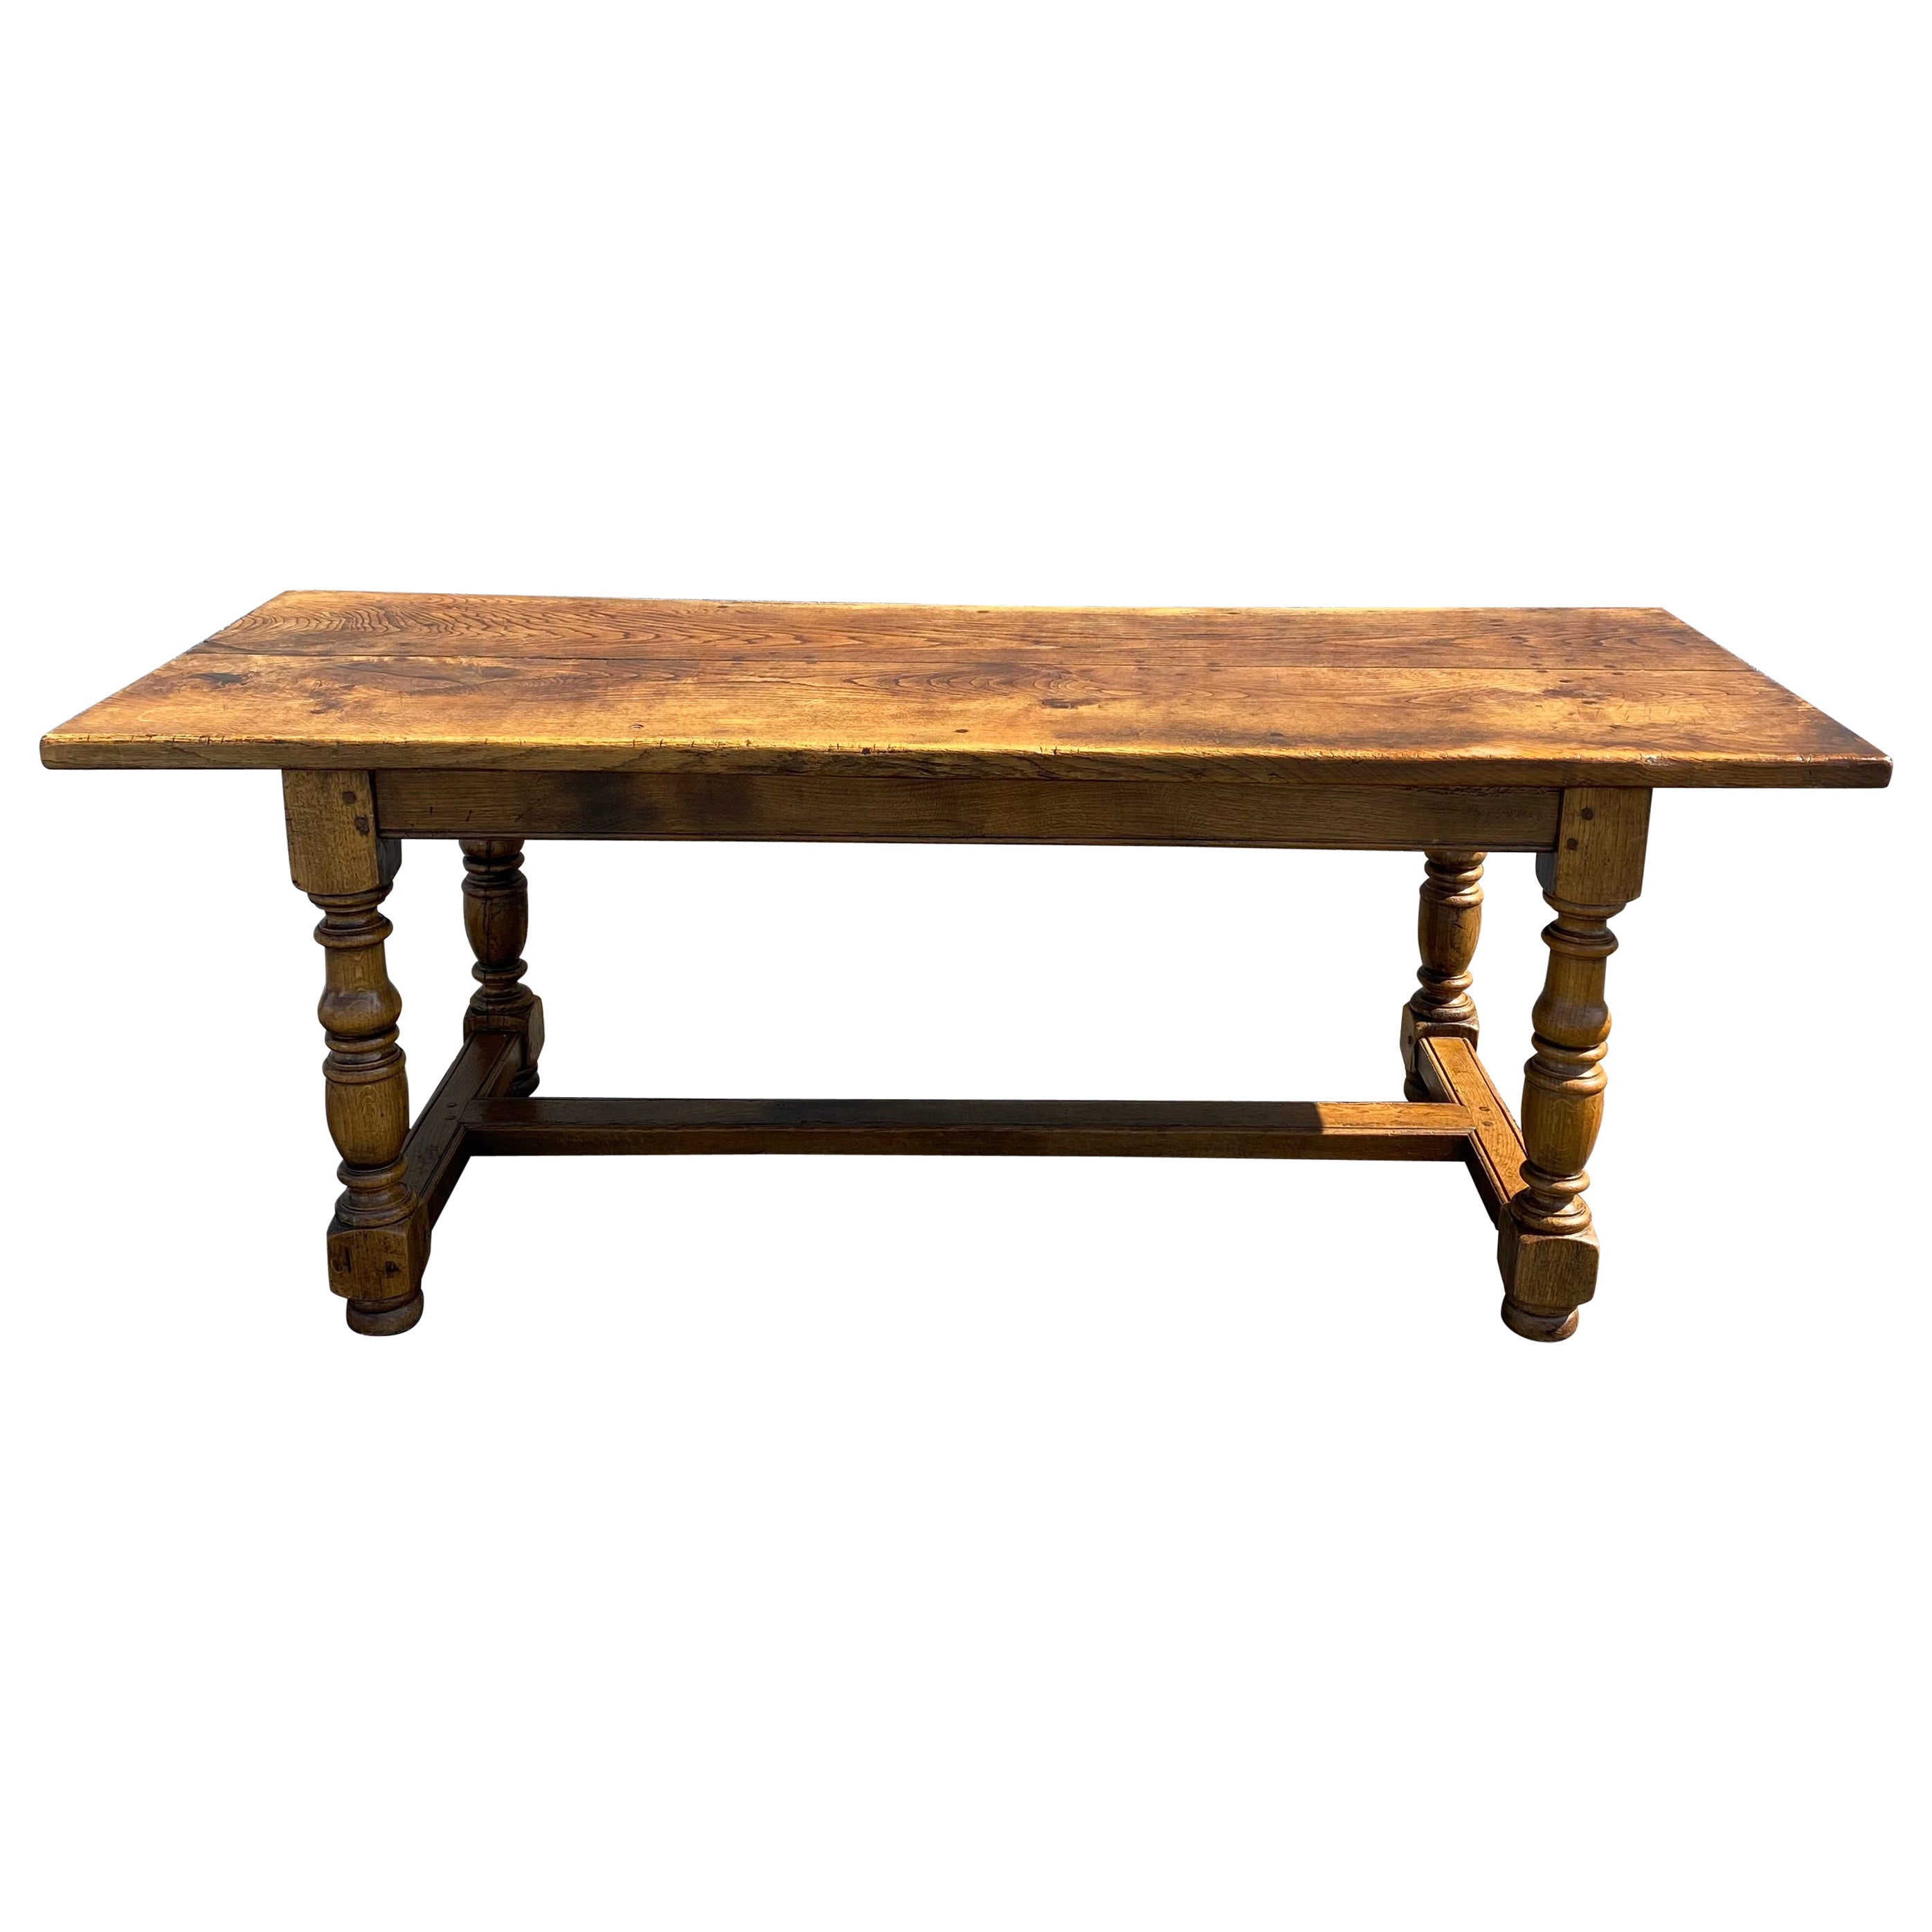 Warm & Welcoming 19th Century French Provincial Farm Table or Refectory Table